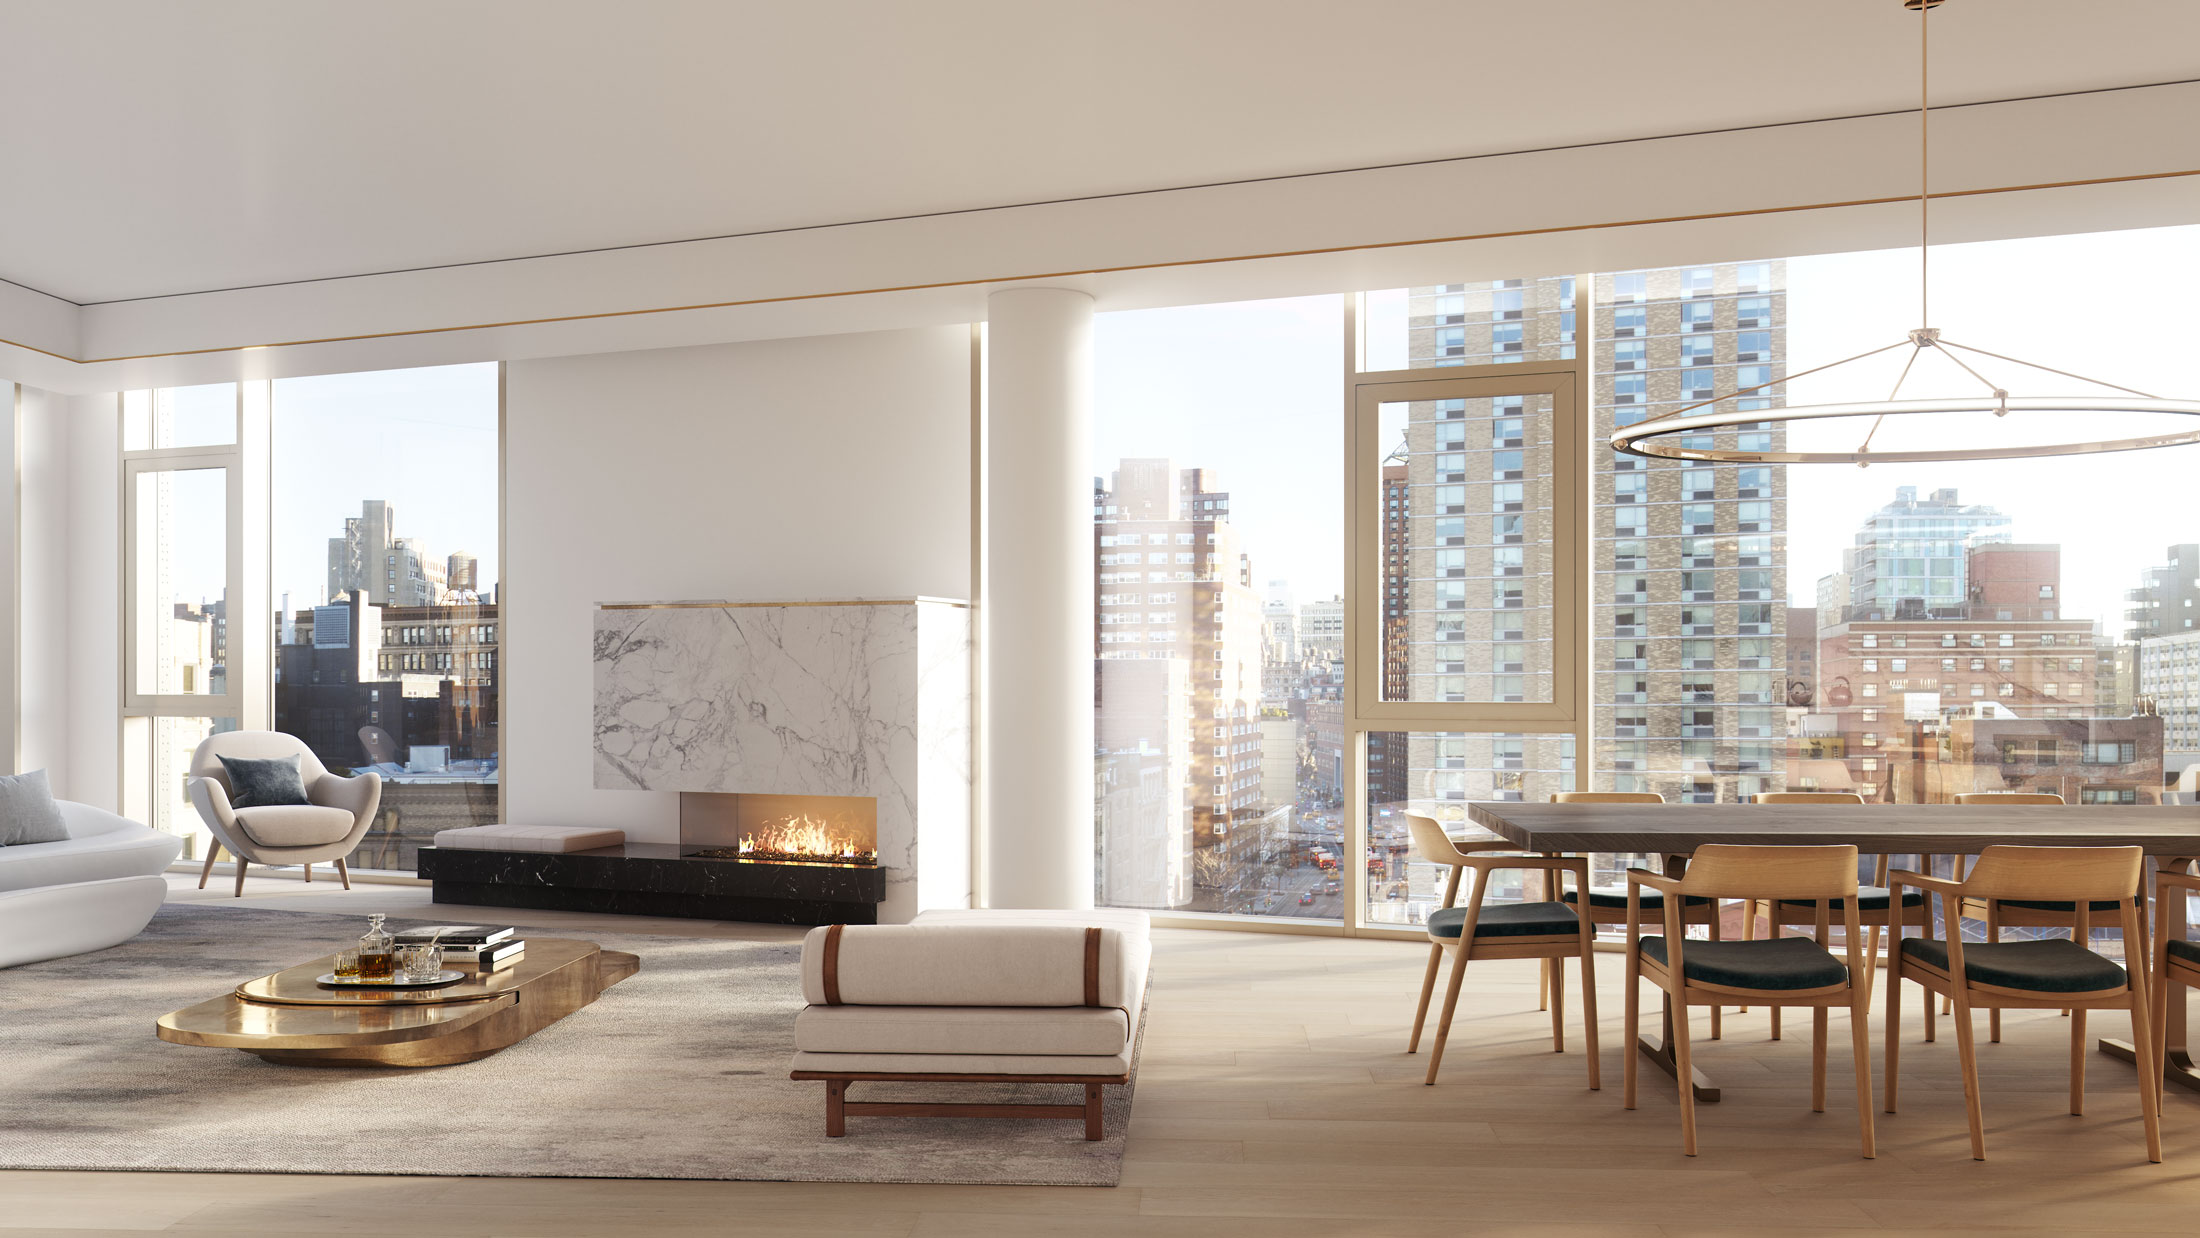 Architectural Rendering of the living room of the 80 East 10th Street project located in Greenwich Village in New York City